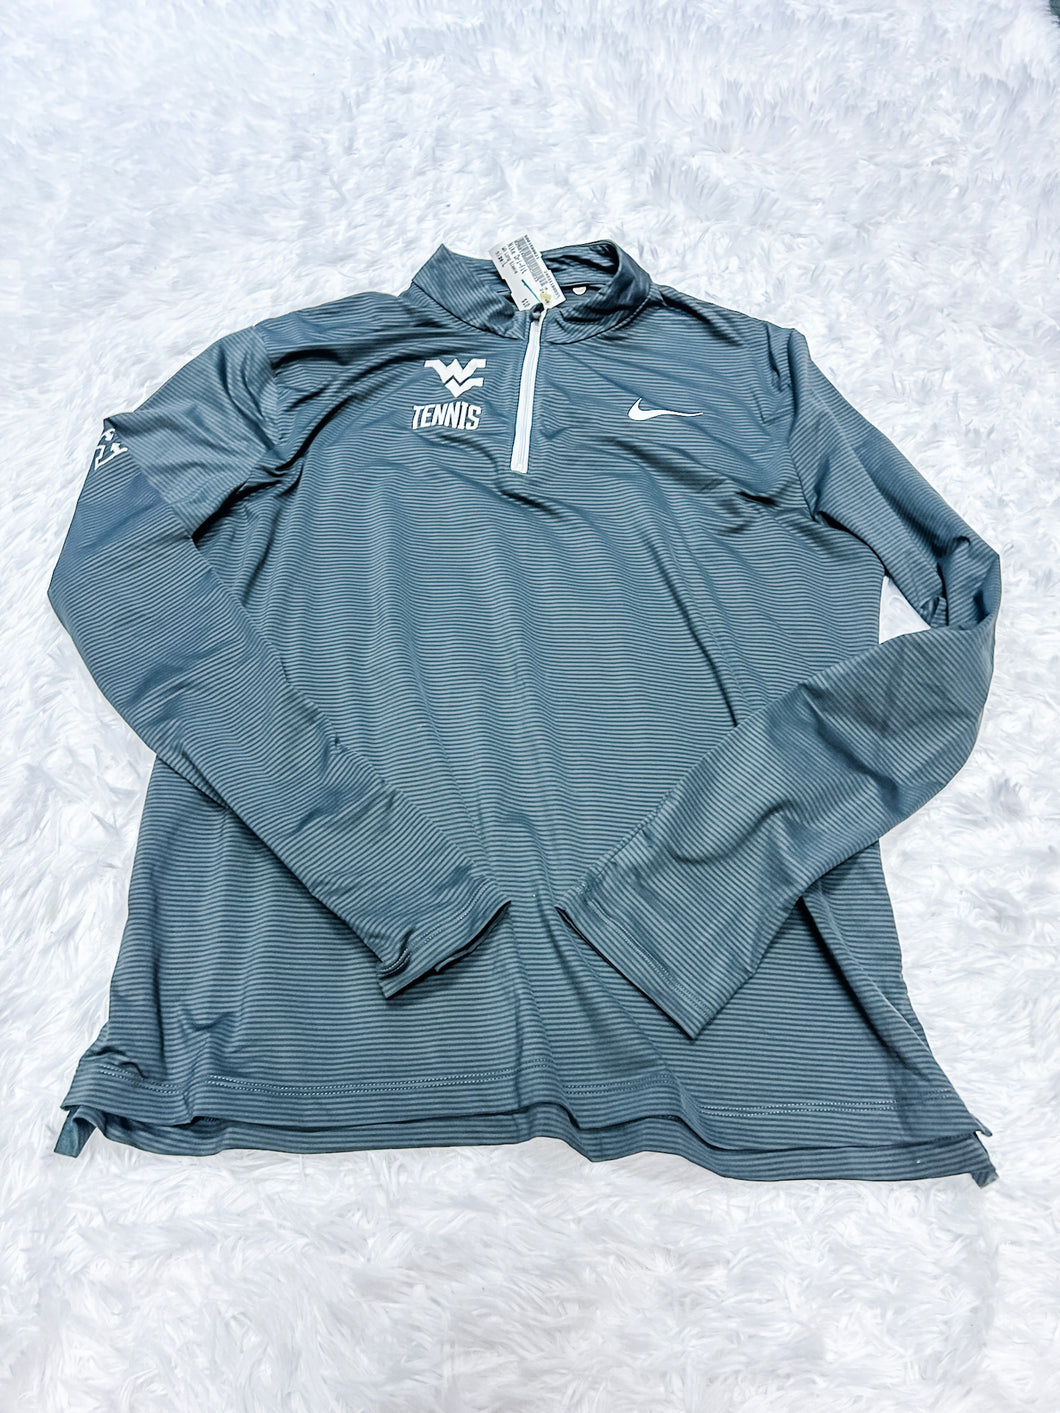 Nike Dri Fit Athletic Top Size Large M0378